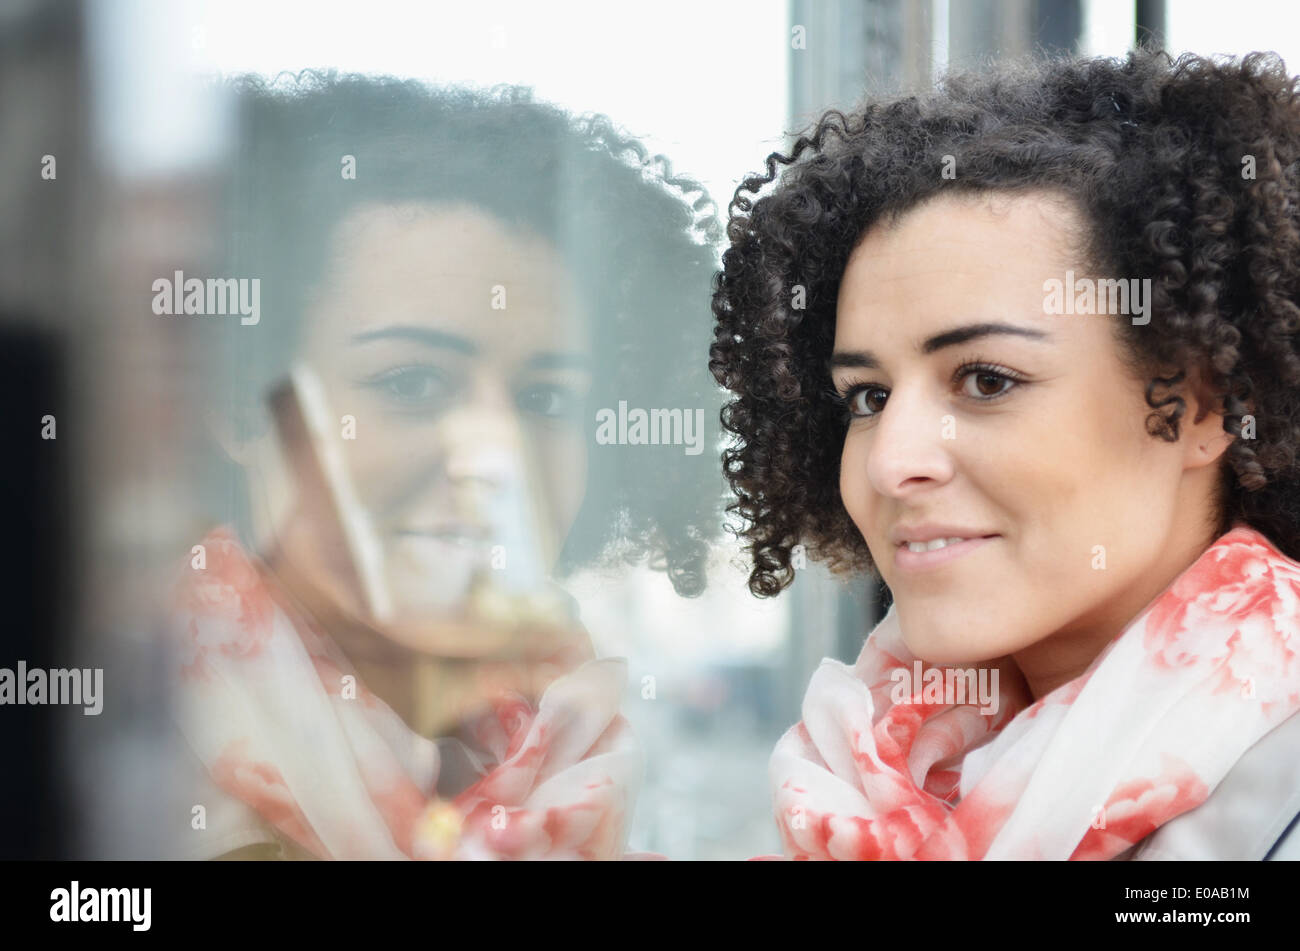 Close up portrait of young woman window shopping Stock Photo